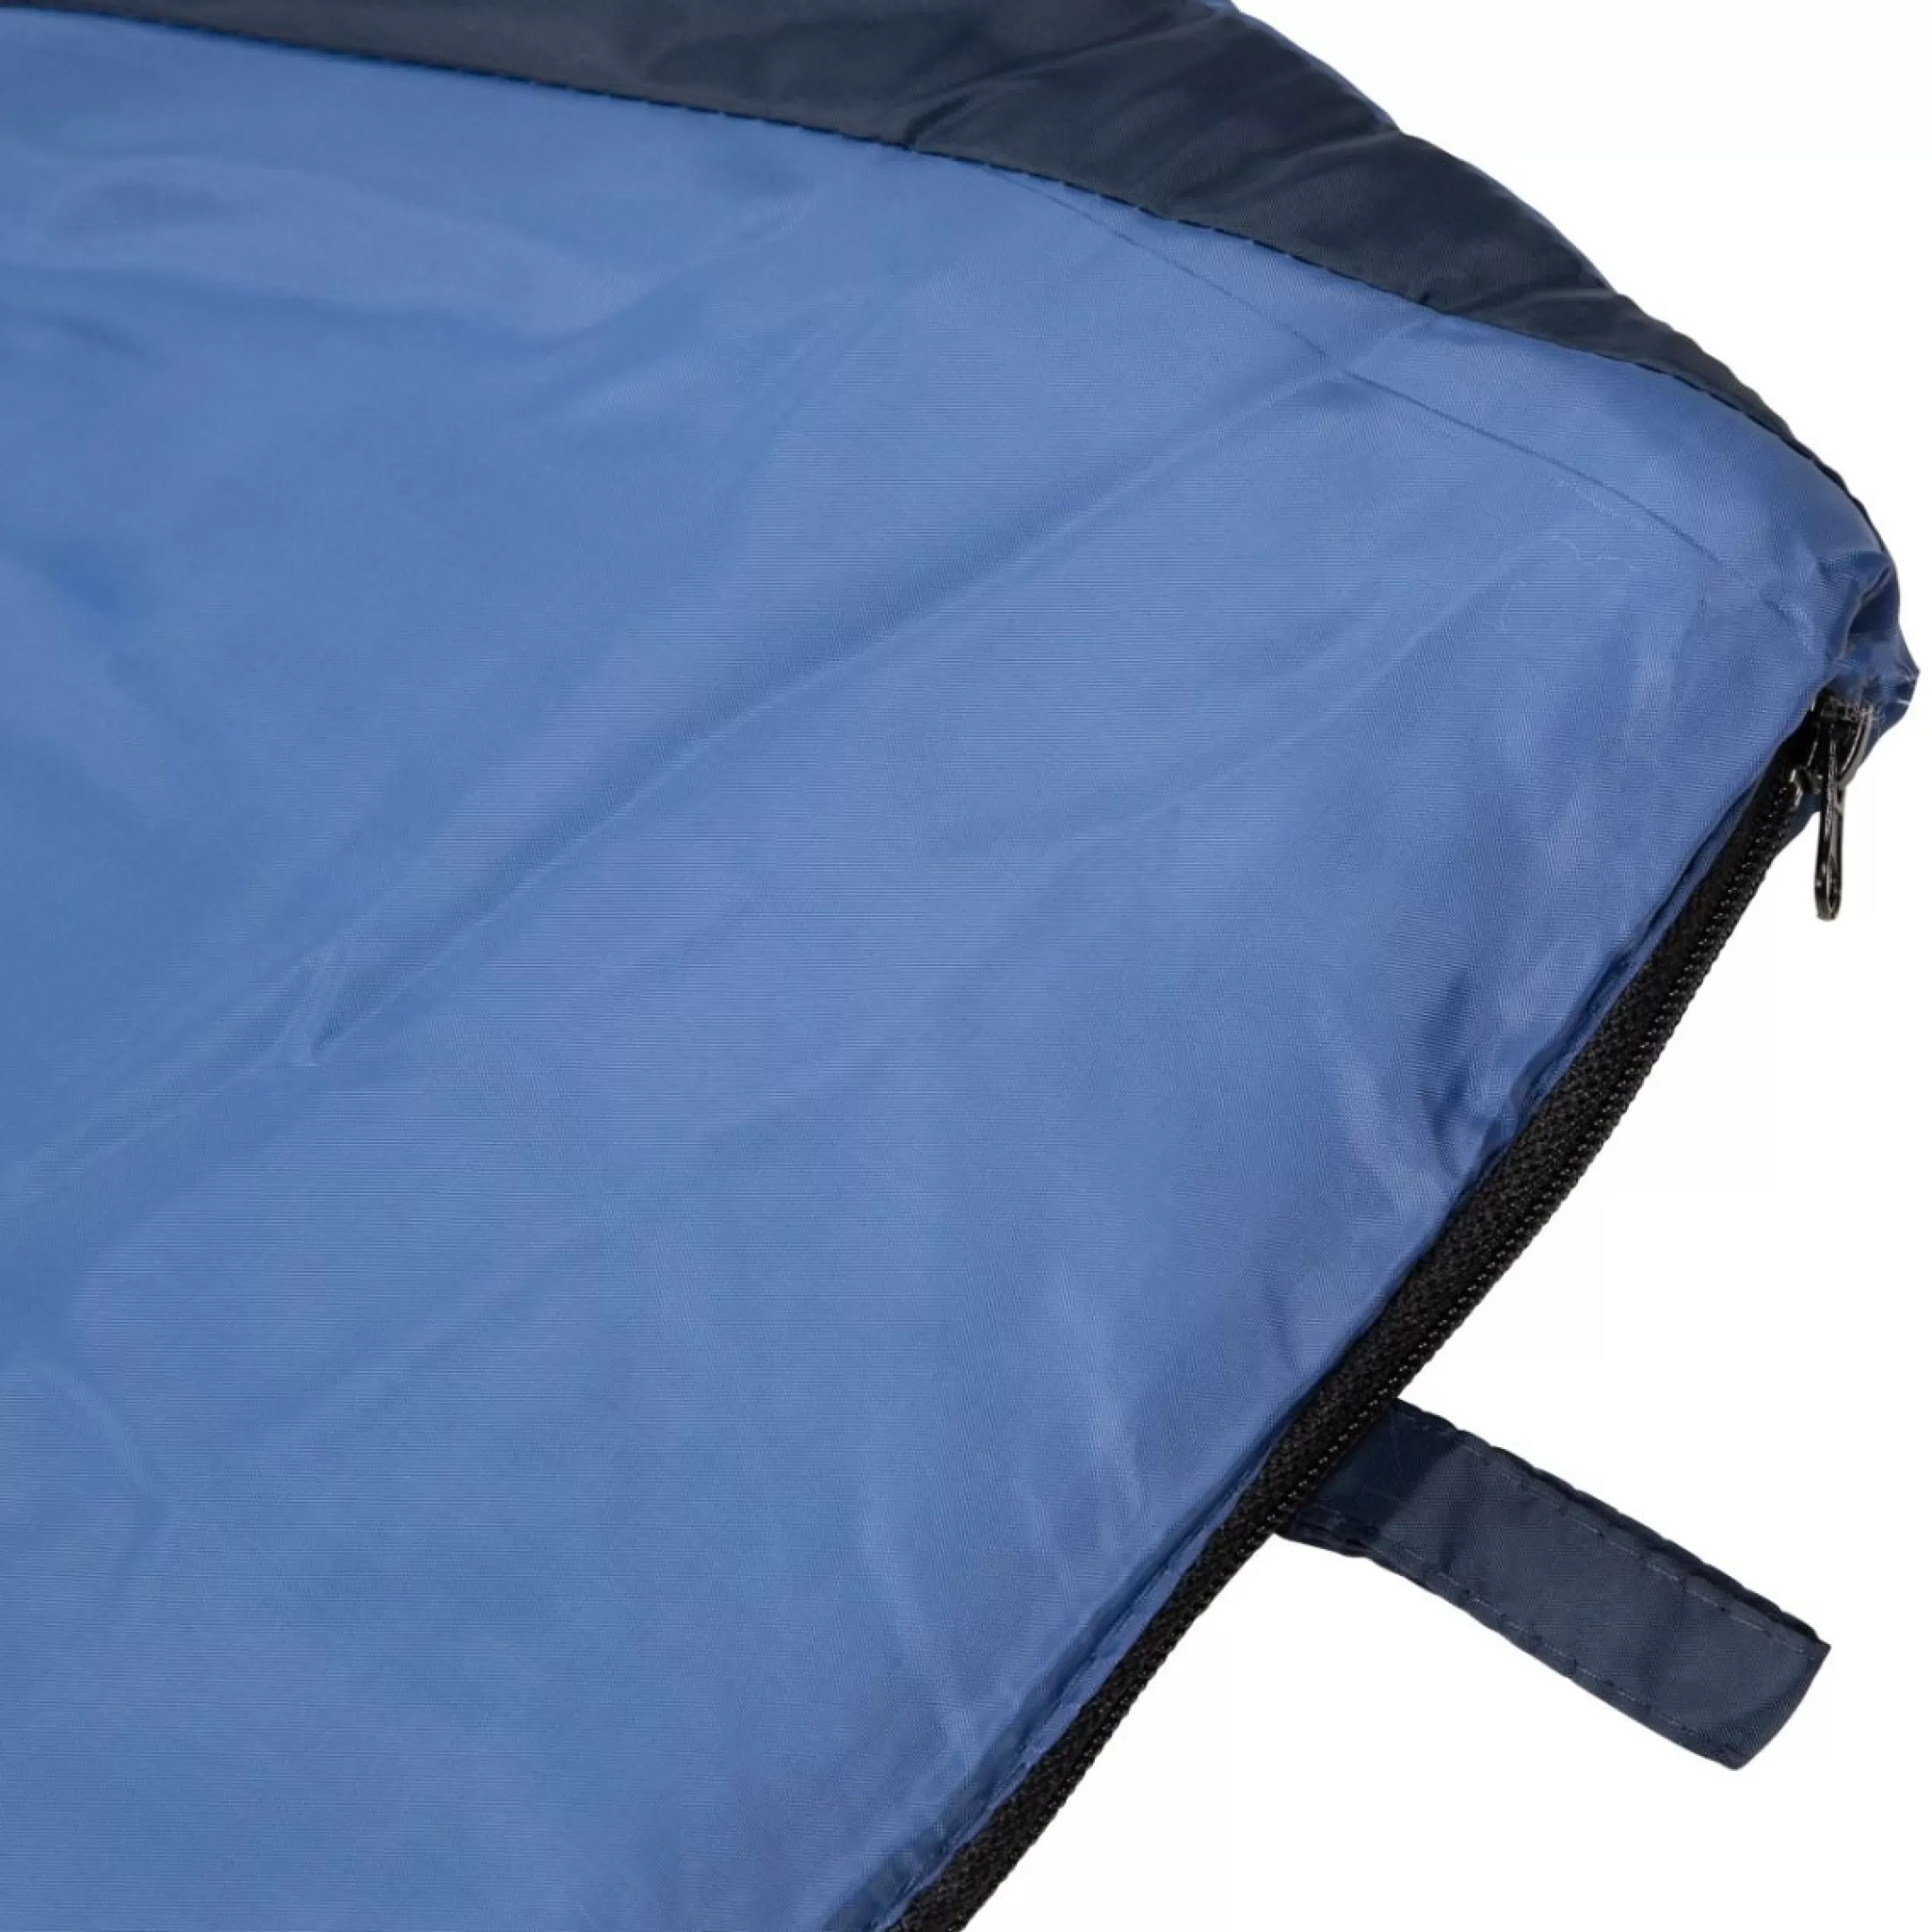 4 Season Sleeping Bag Water Resistant Pitched | Trespass Outlet